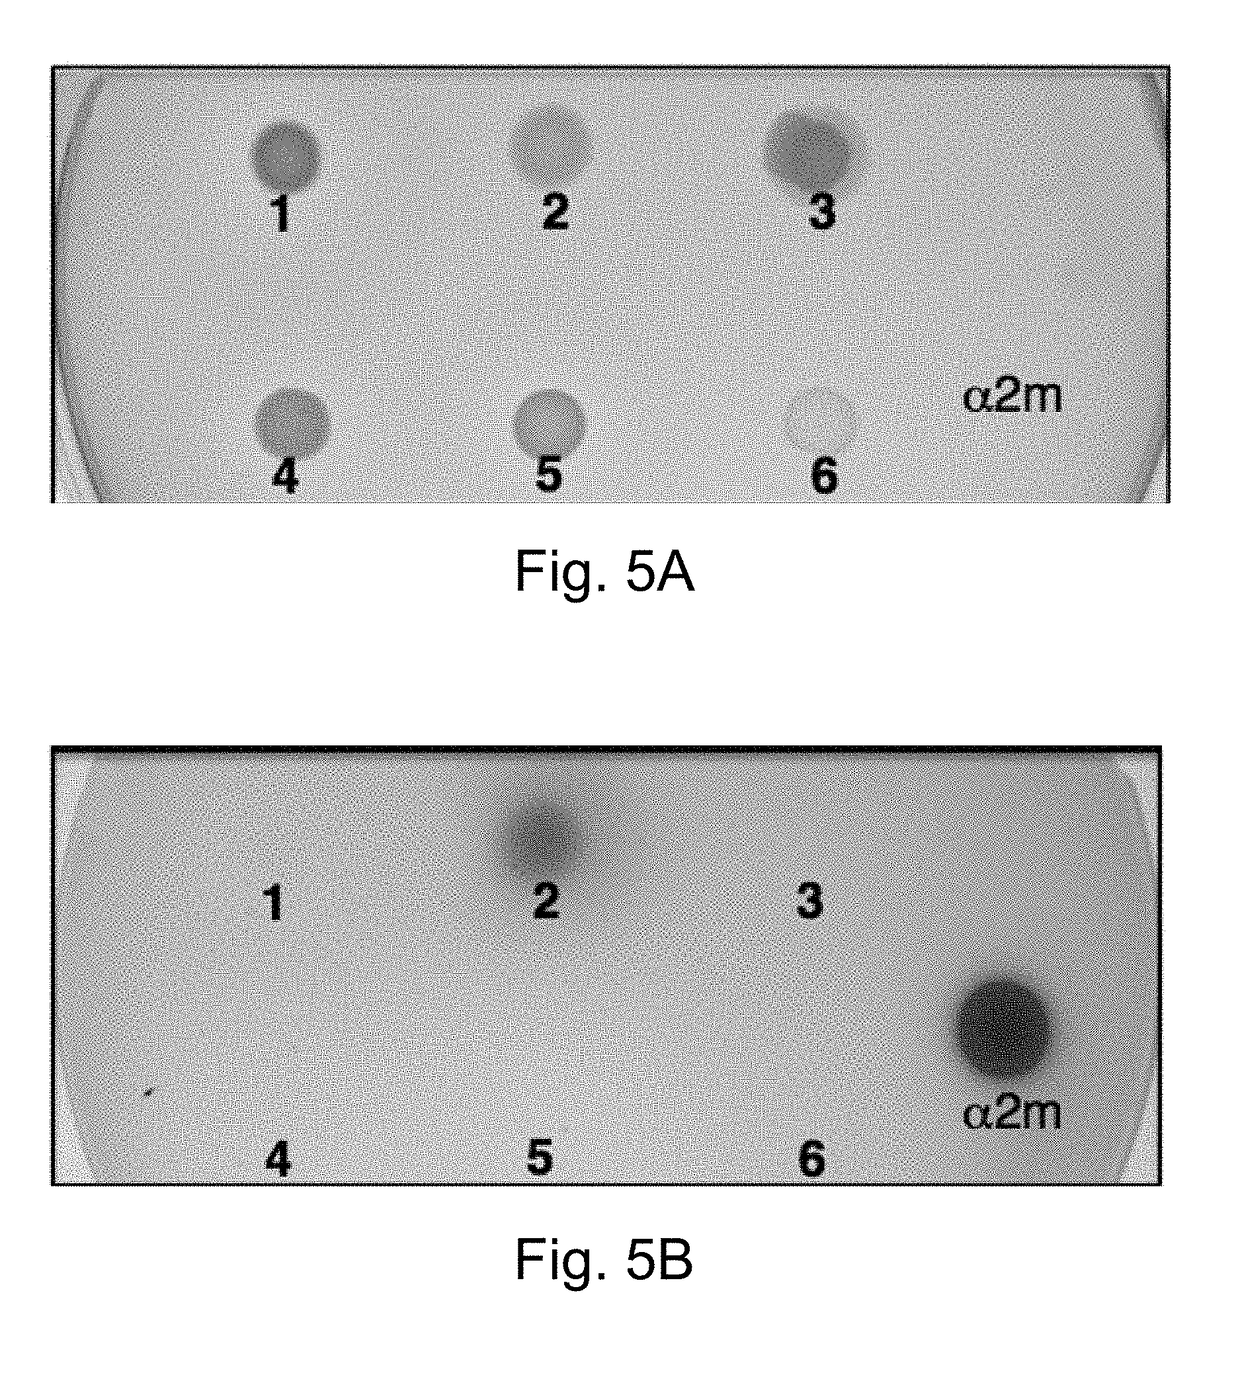 Topical and orally administered protease inhibitors and bacterial vectors for the treatment of disorders and methods of treatment